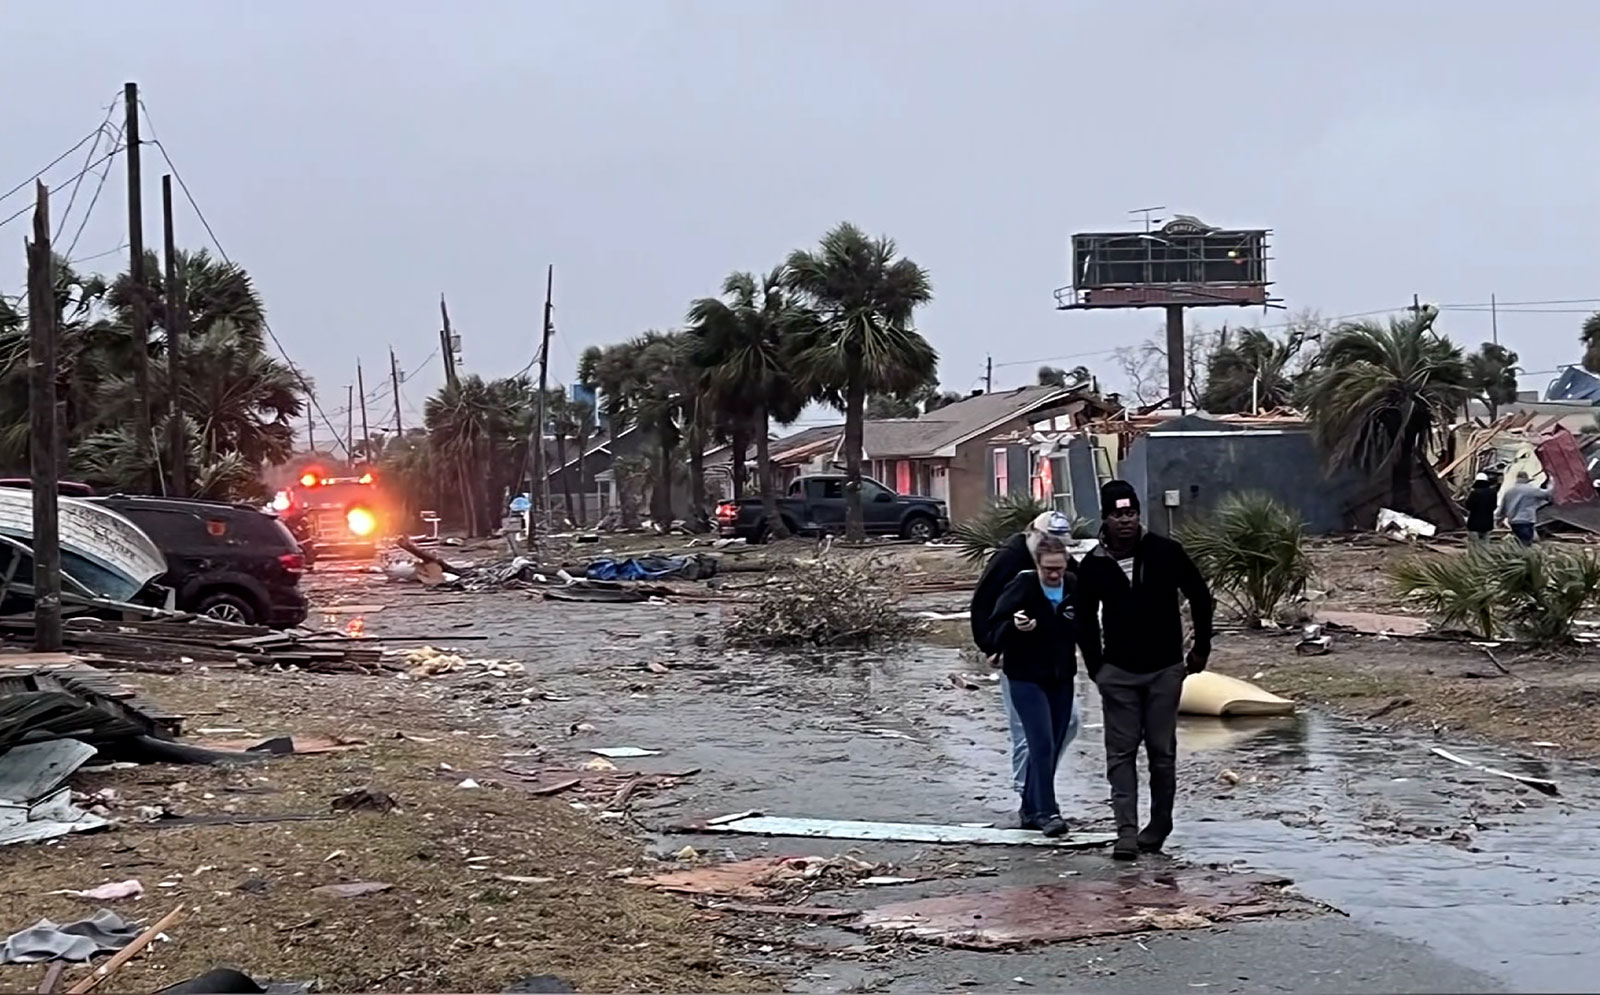 Storm damage is seen in Panama City Beach on Tuesday.